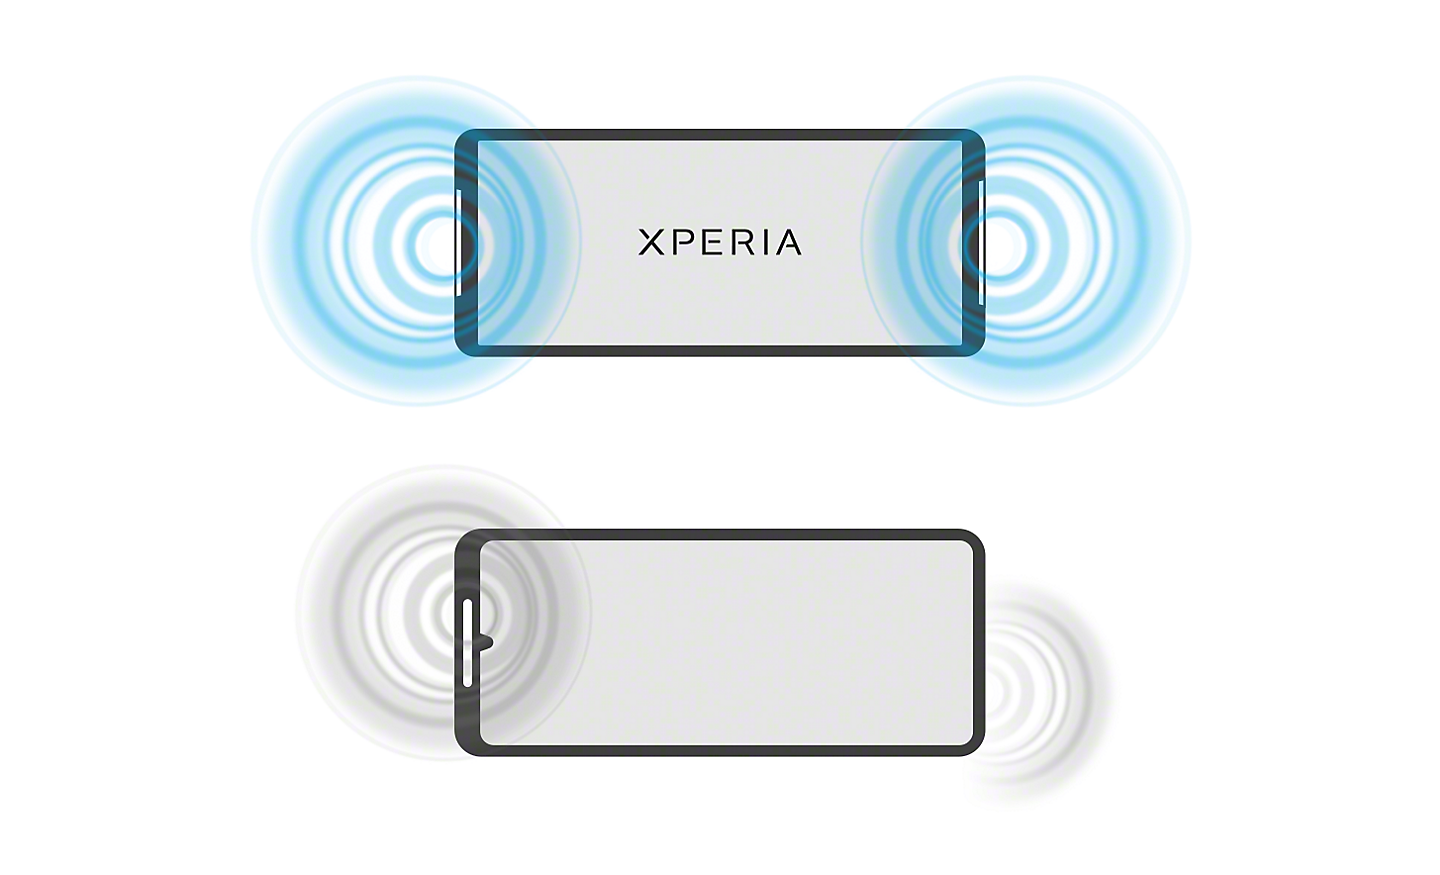 Illustration comparing soundwaves from an Xperia with Full-stage stereo speakers to soundwaves from a conventional smartphone